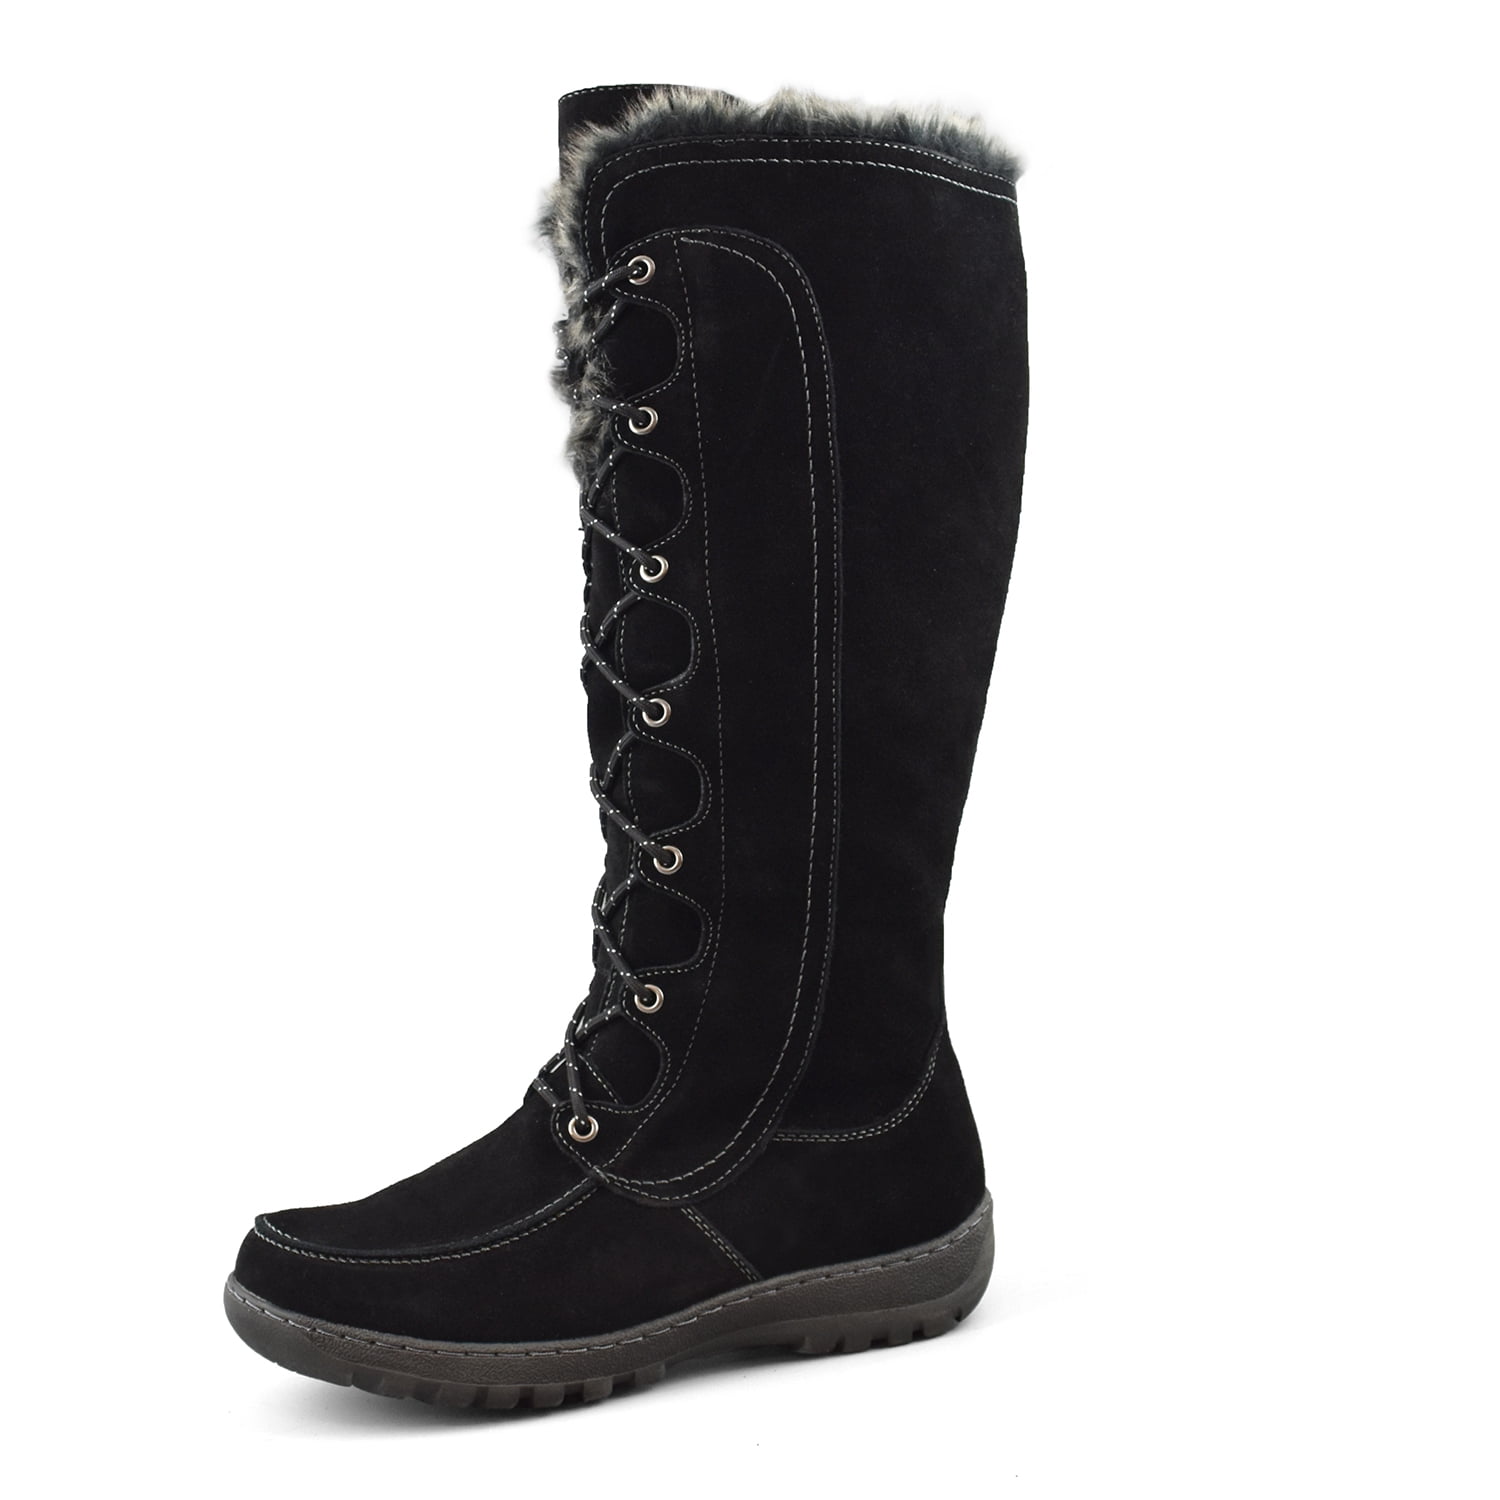 Comfy Moda - Comfy Moda Women's Tall Snow Winter Boots | Suede Leather ...